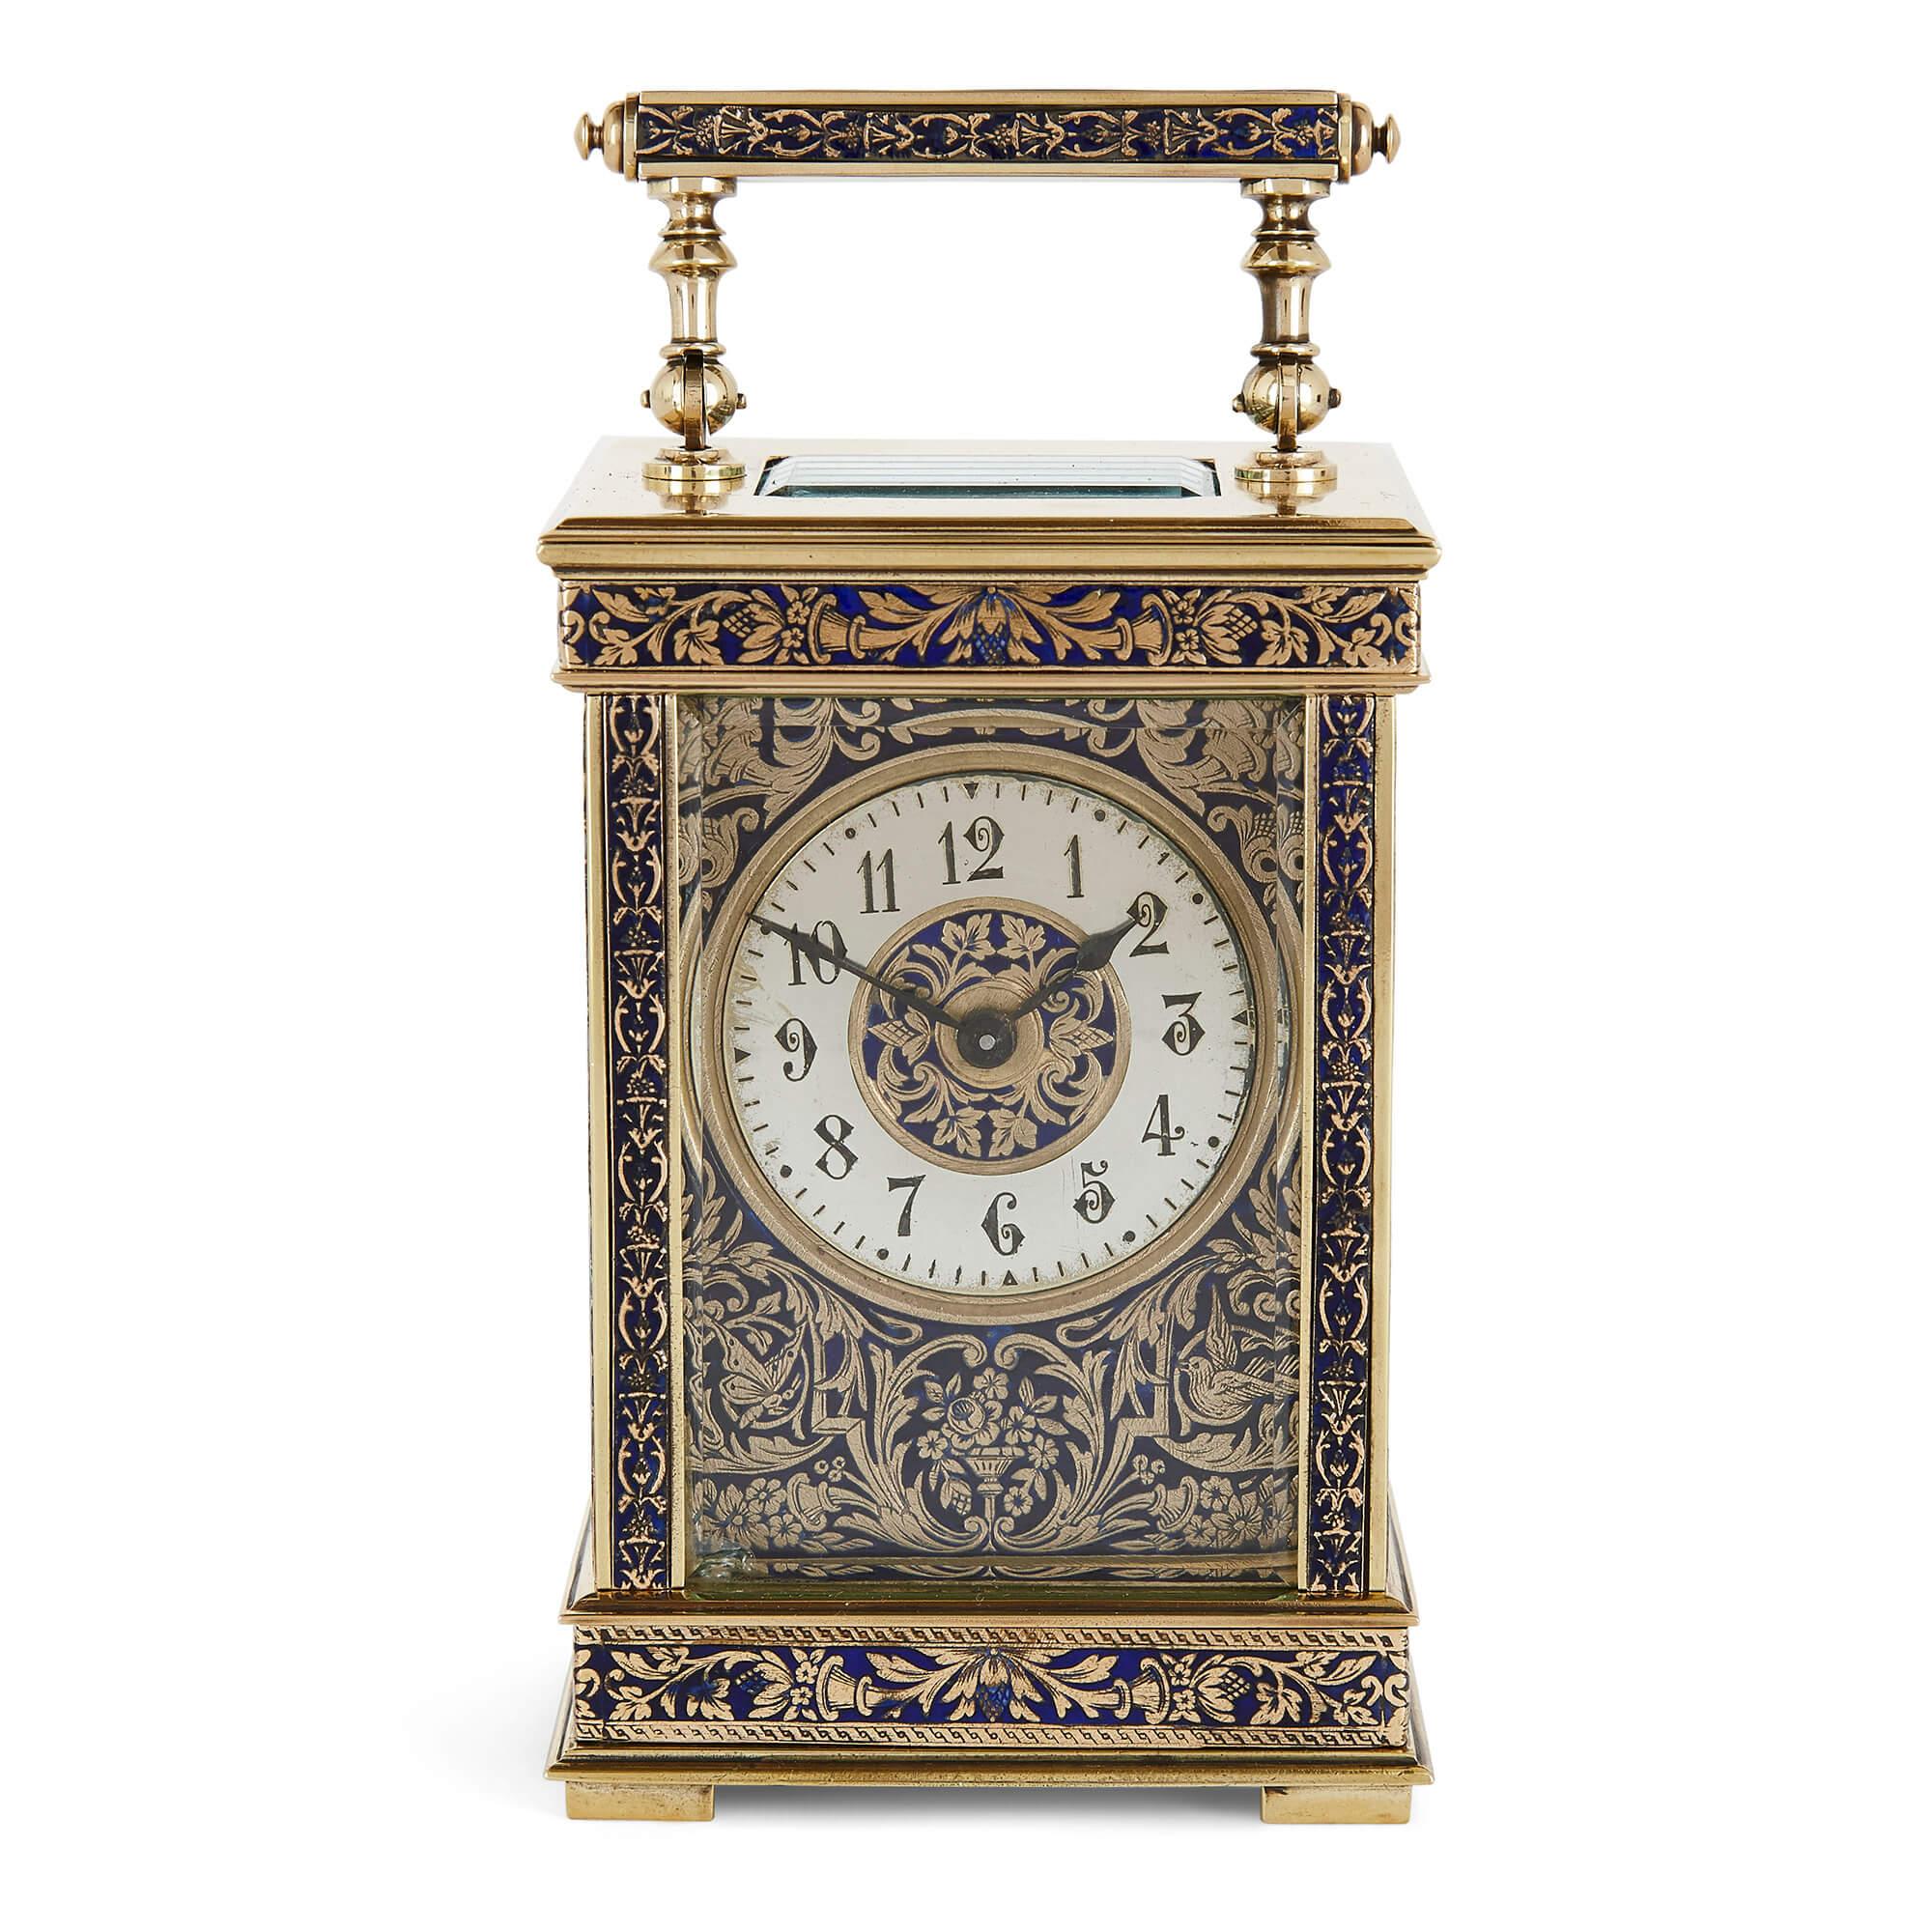 Antique French enamelled and engraved brass carriage clock
French, late 19th century
Measures: Clock: Height 12cm, width 8cm, depth 7cm
Case: Height 15cm, width 11cm, depth 9cm

This beautiful French carriage clock features a brass frame that